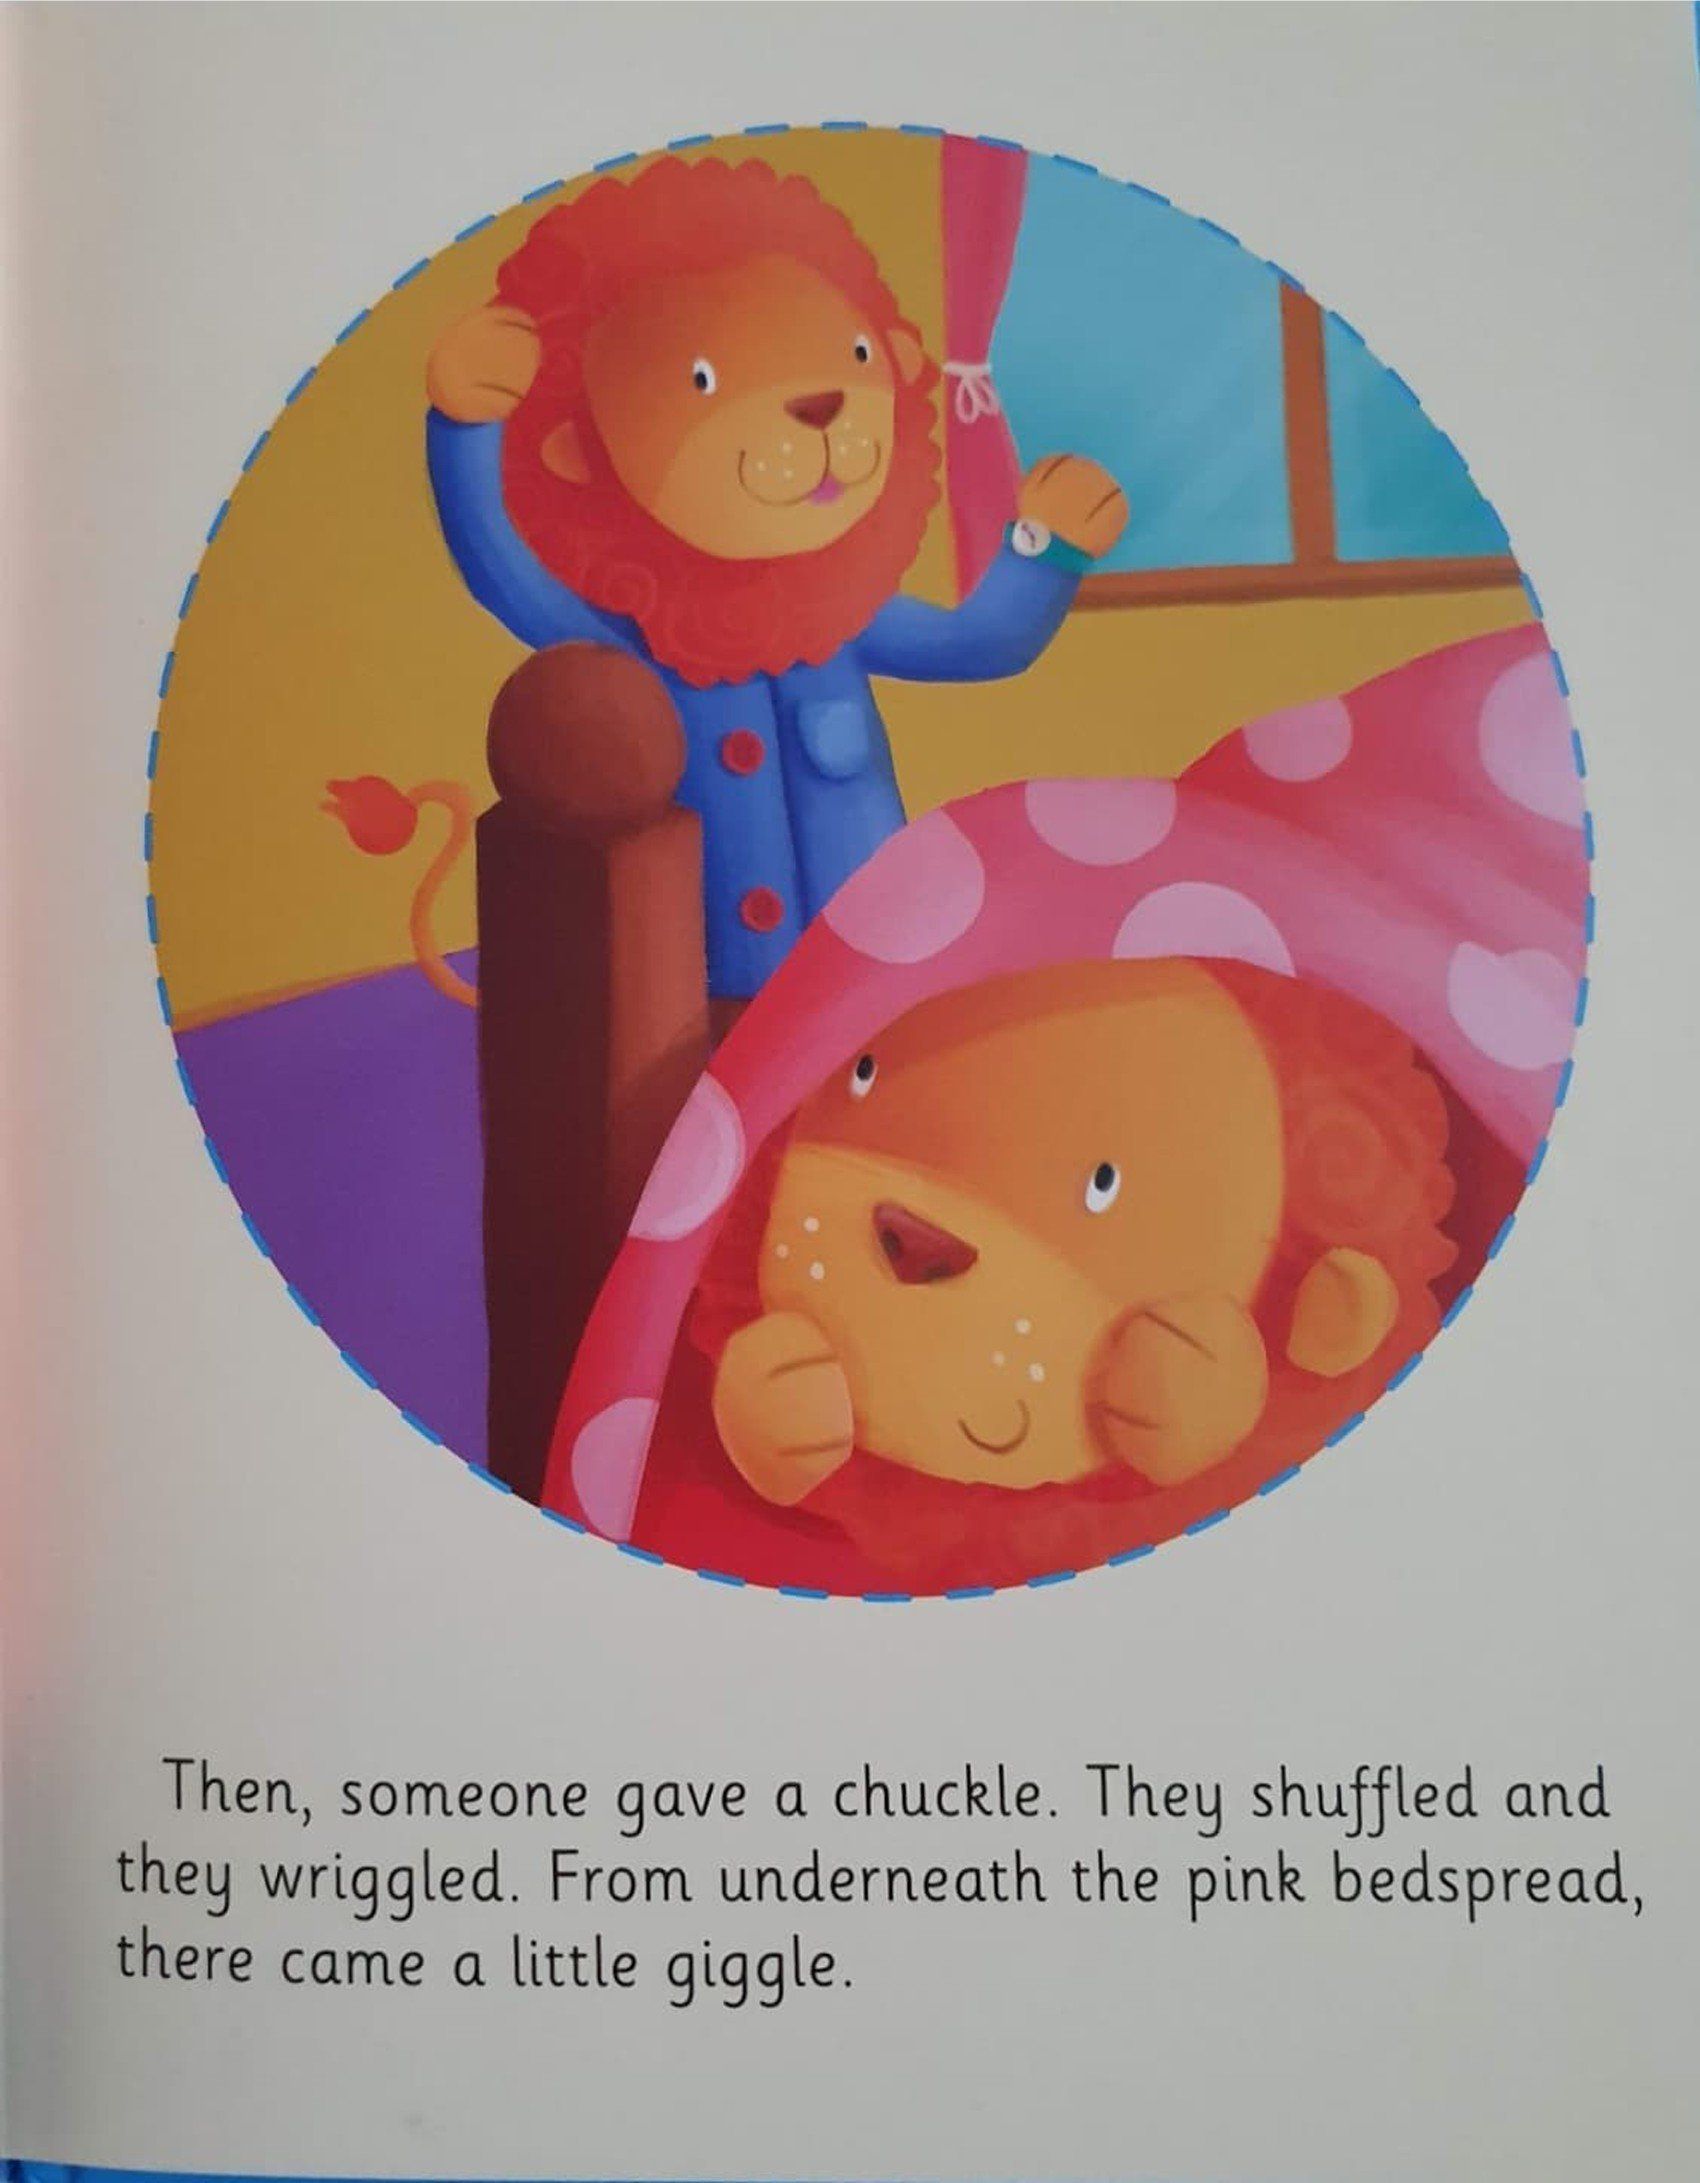 Stories For 2 Years Olds Like New Recuddles.ch  (6176346898617)